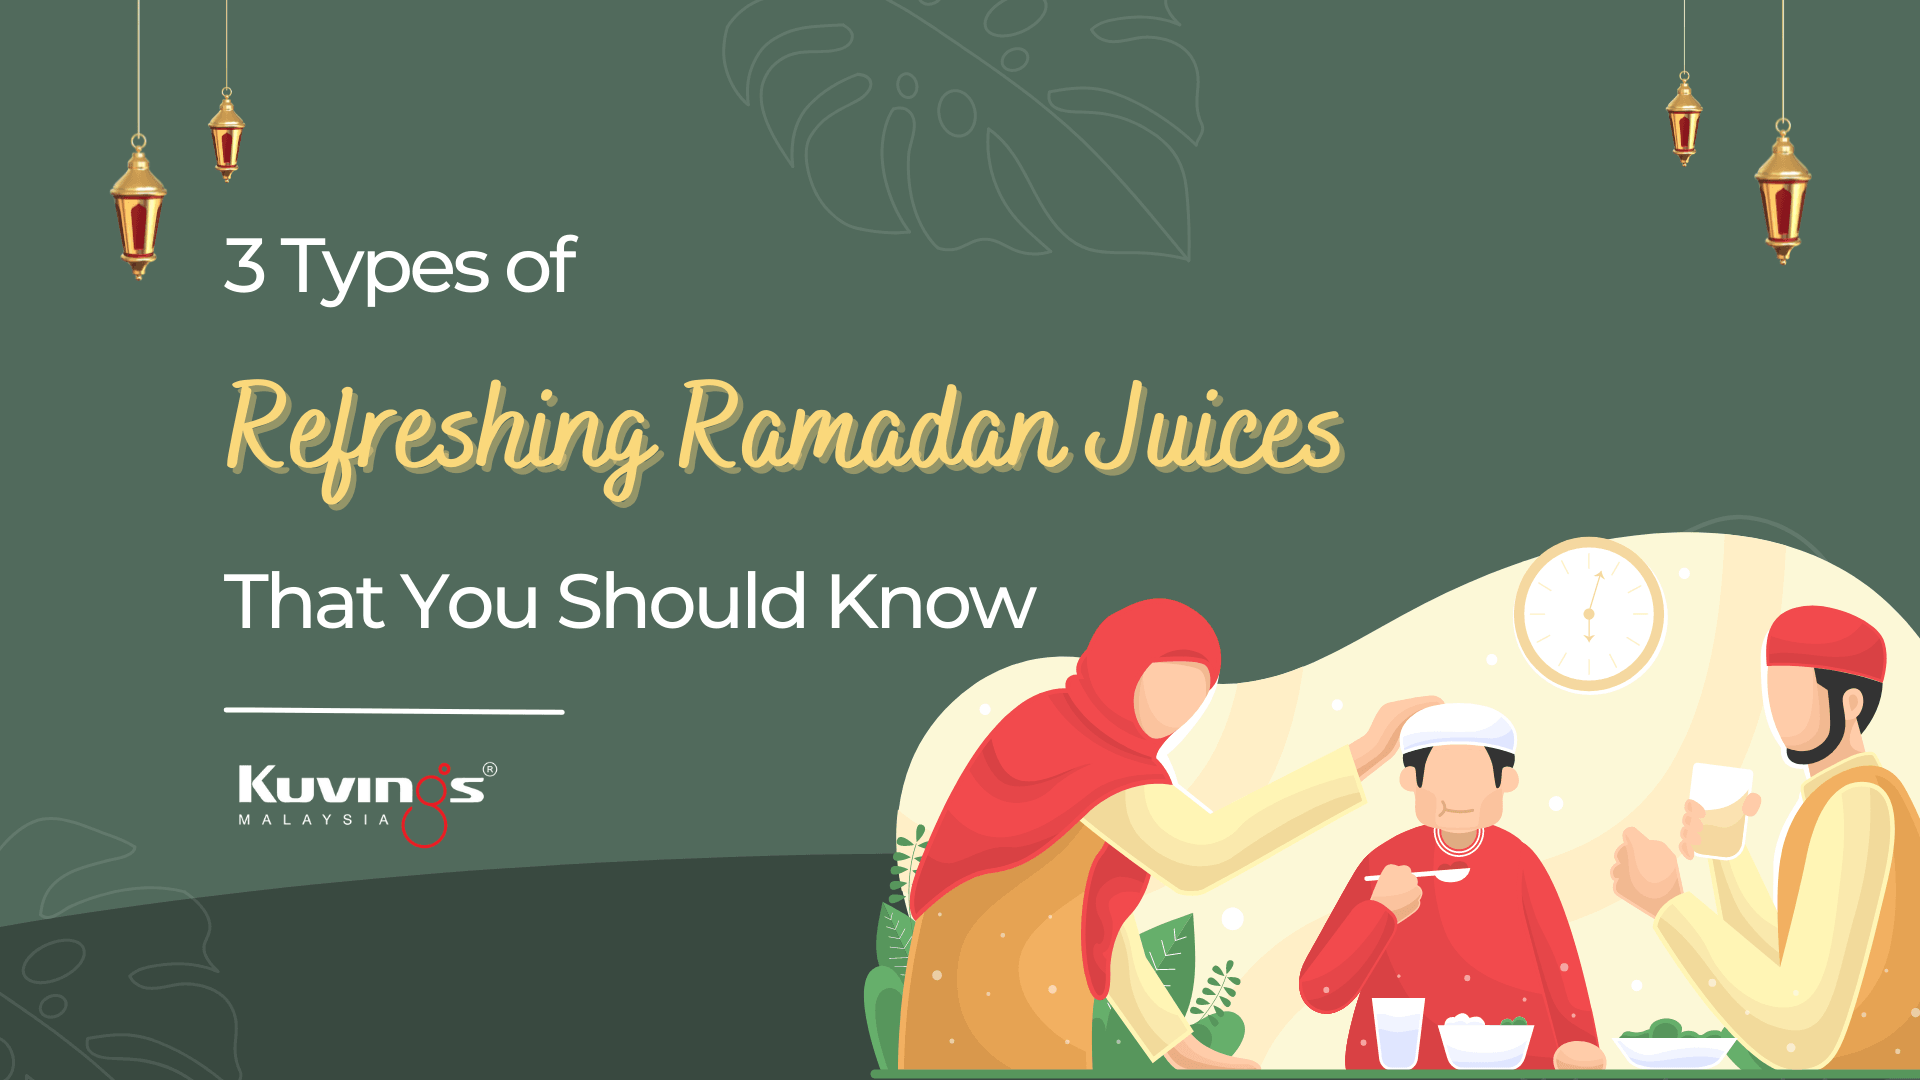 3 Types of Refreshing Ramadan Juices That You Should Know - Kuvings.my